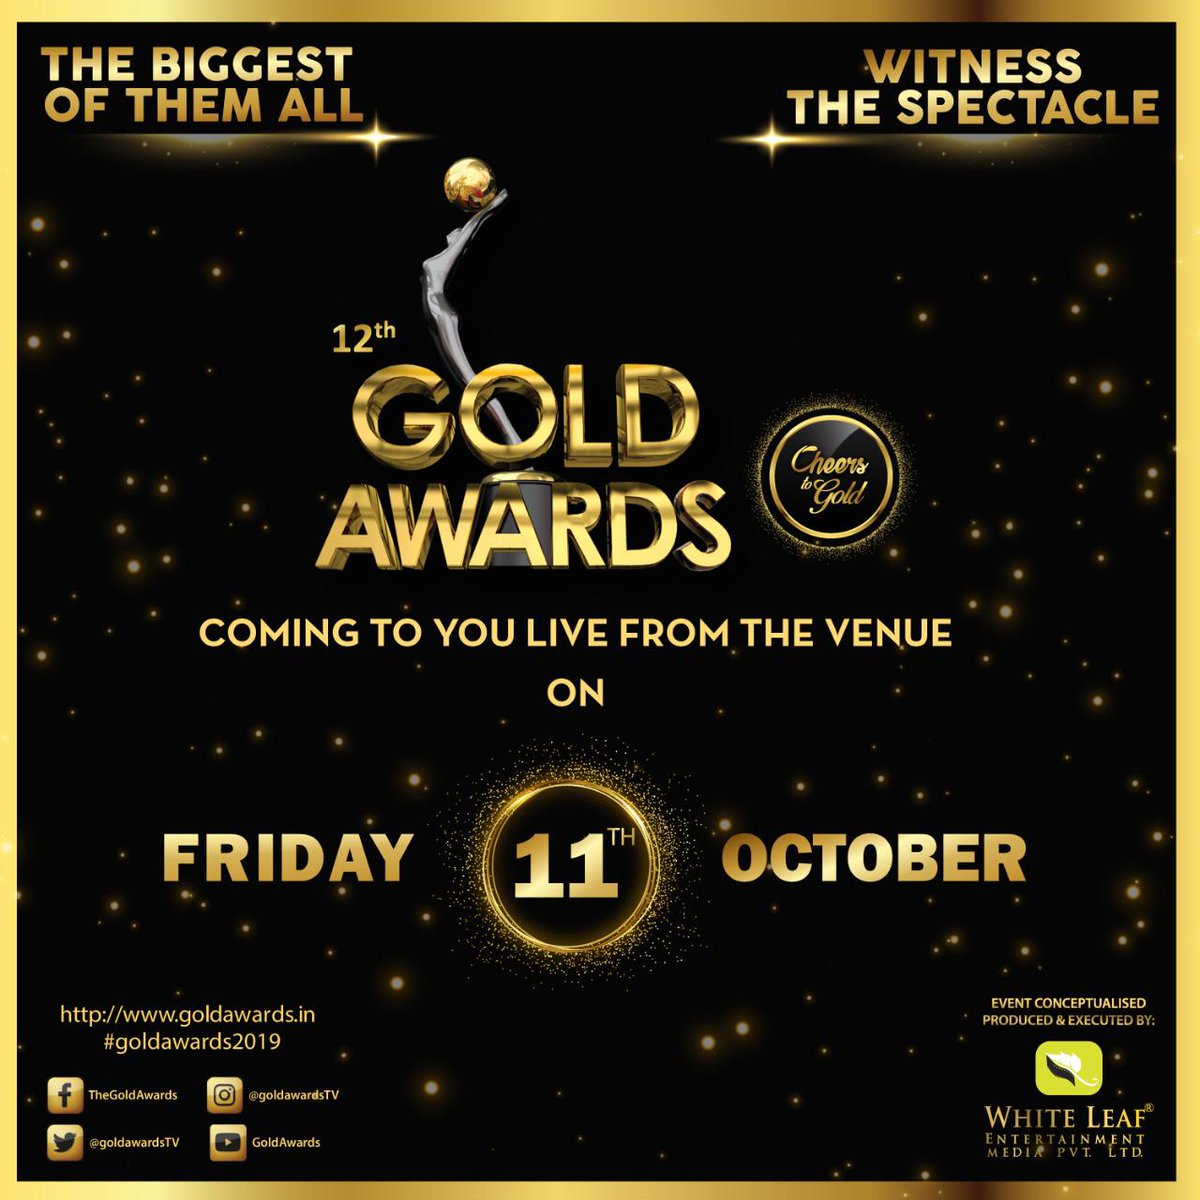 Ready steady go. #dateannouncement #goldawards2019 & we are getting bigger this year by coming to you LIVE from the venue. #performances #awards sab hoga- Date नोट कर लीजिए। आ रहे हैं हम 😊😊✨✨😇😇🙏🏻🙏🏻 @Whiteleafent1 @goldawardsTV
#goldawards2019 #goldawards #12thgoldawards